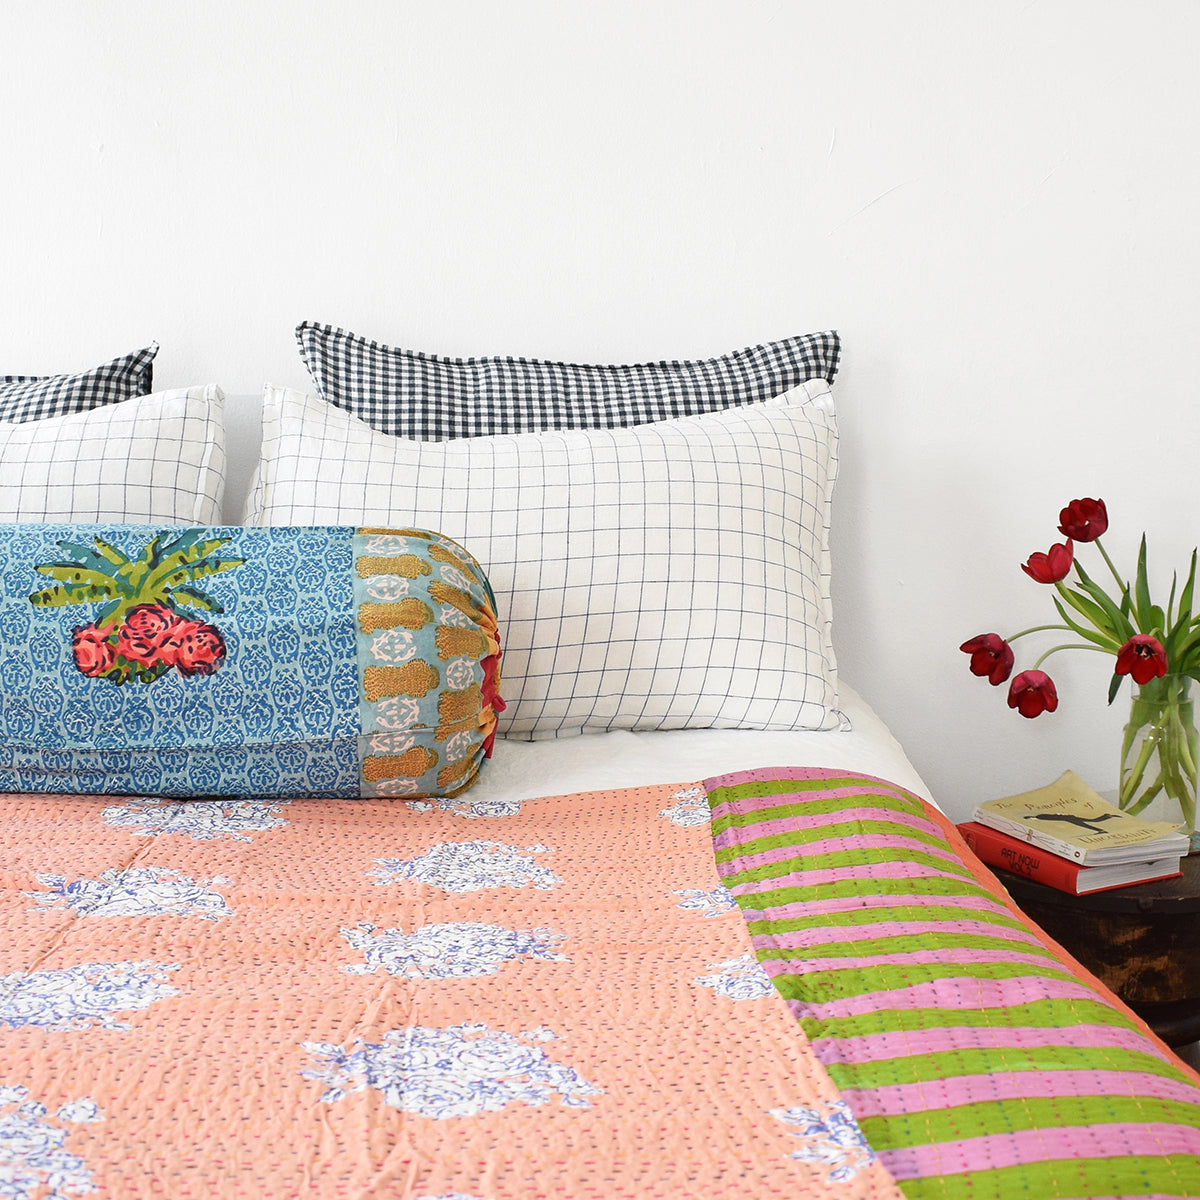 Linge Particulier Navy Check Standard Linen Pillowcase Sham with Lisa Corti gudri kantha quilt and Lisa Corti pillow for a colorful linen bedding look in blue check - Collyer's Mansion